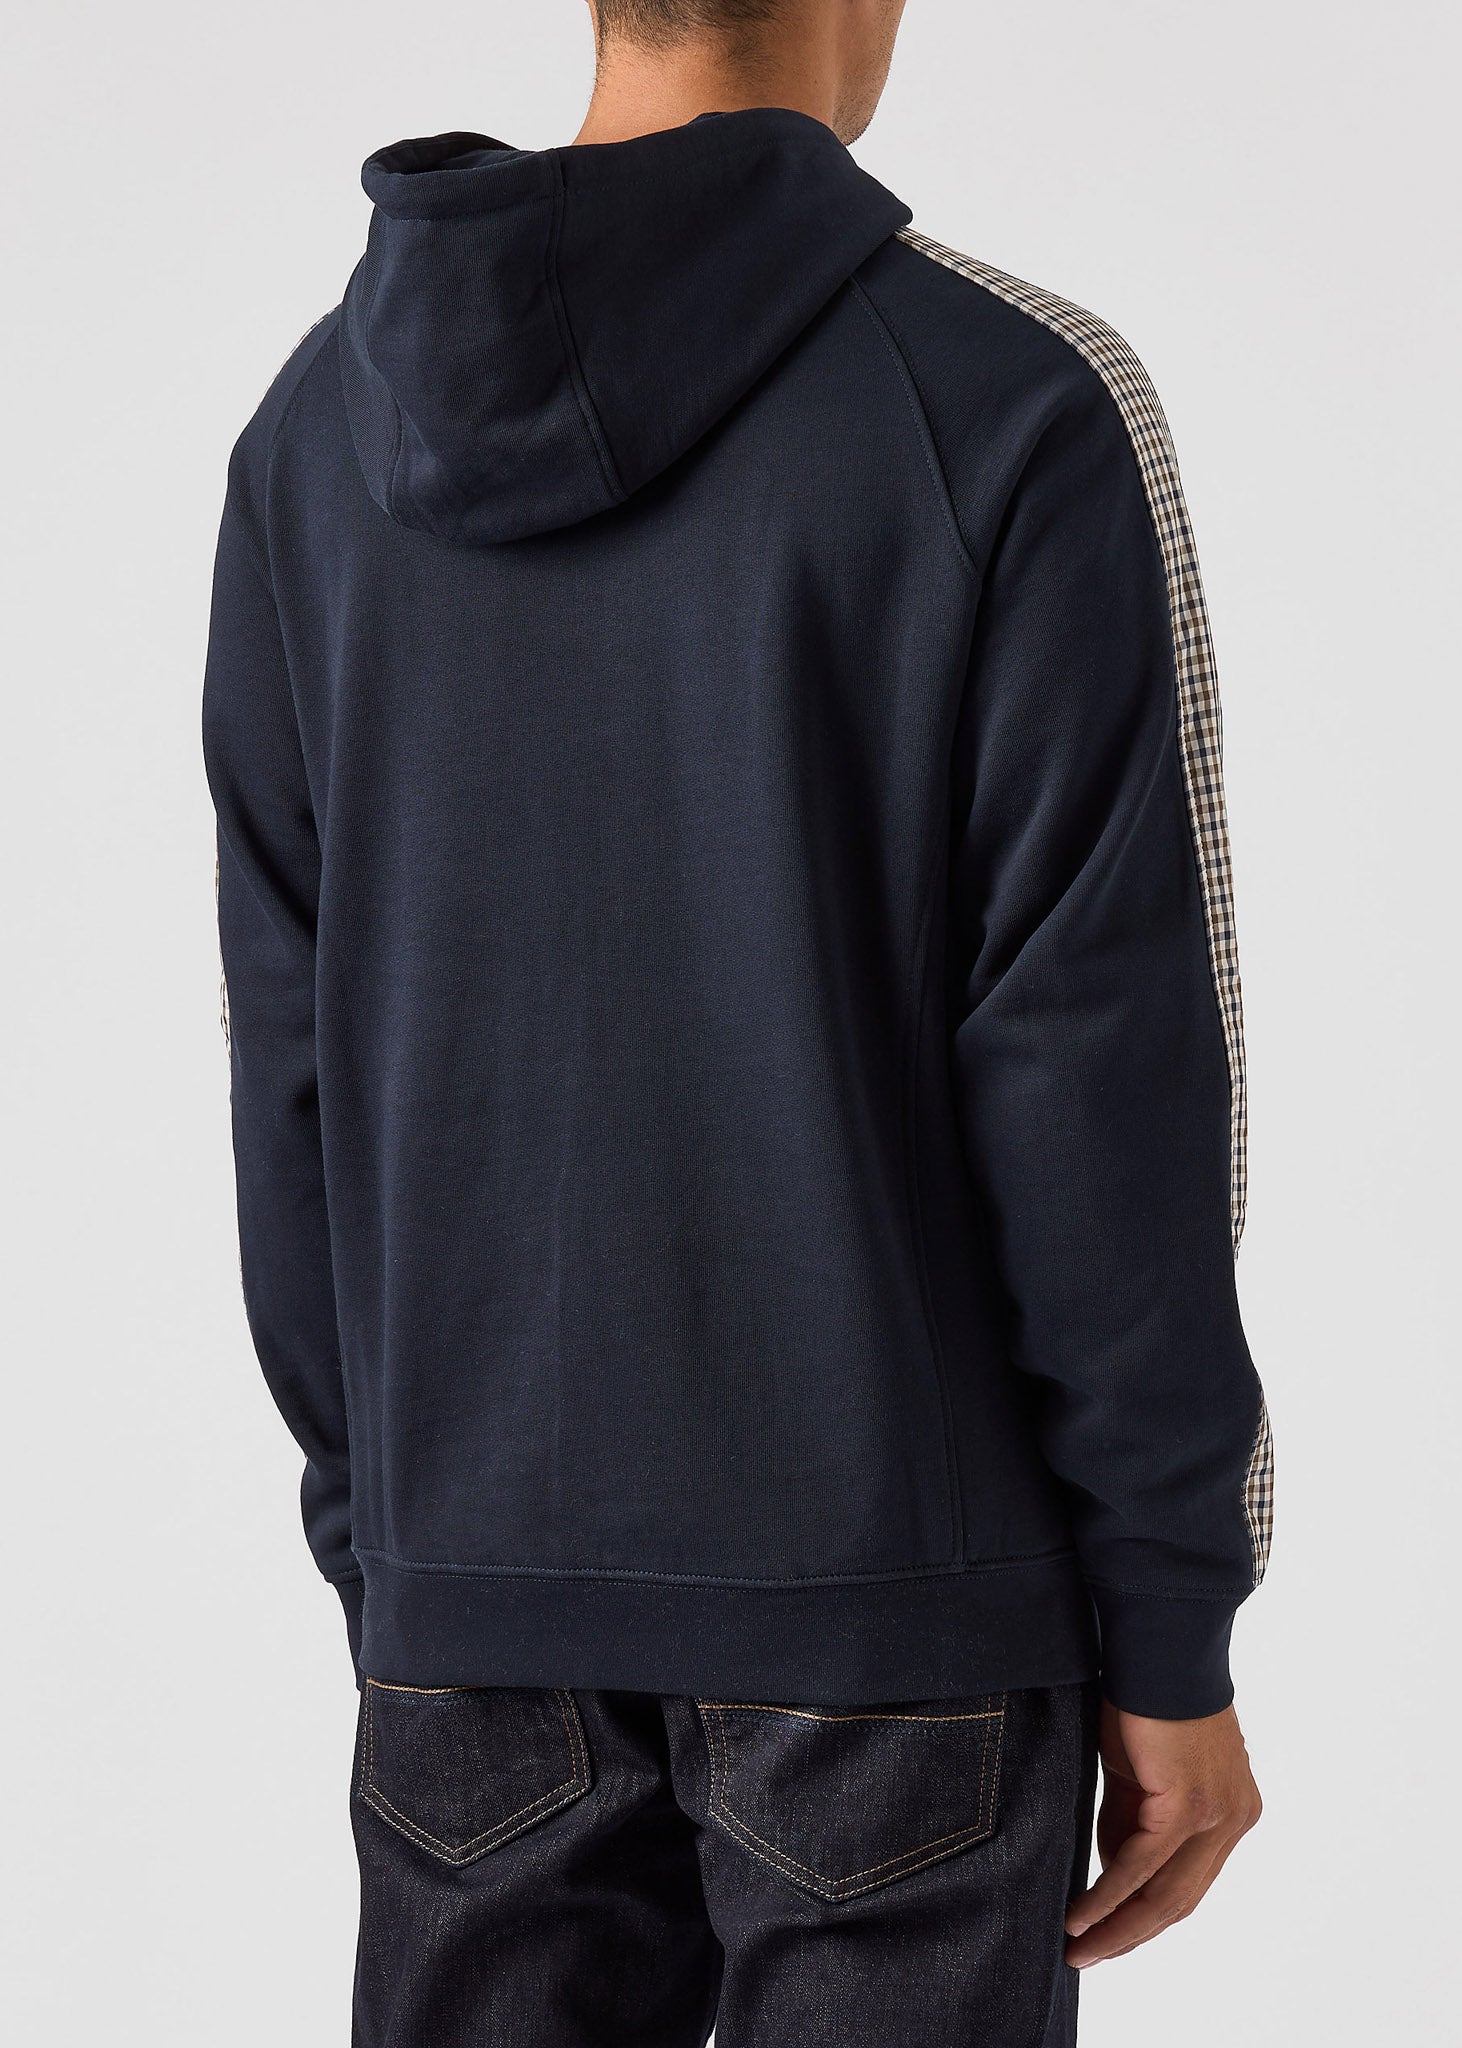 Weekend Offender Hoodies  Lo sung - navy house check 